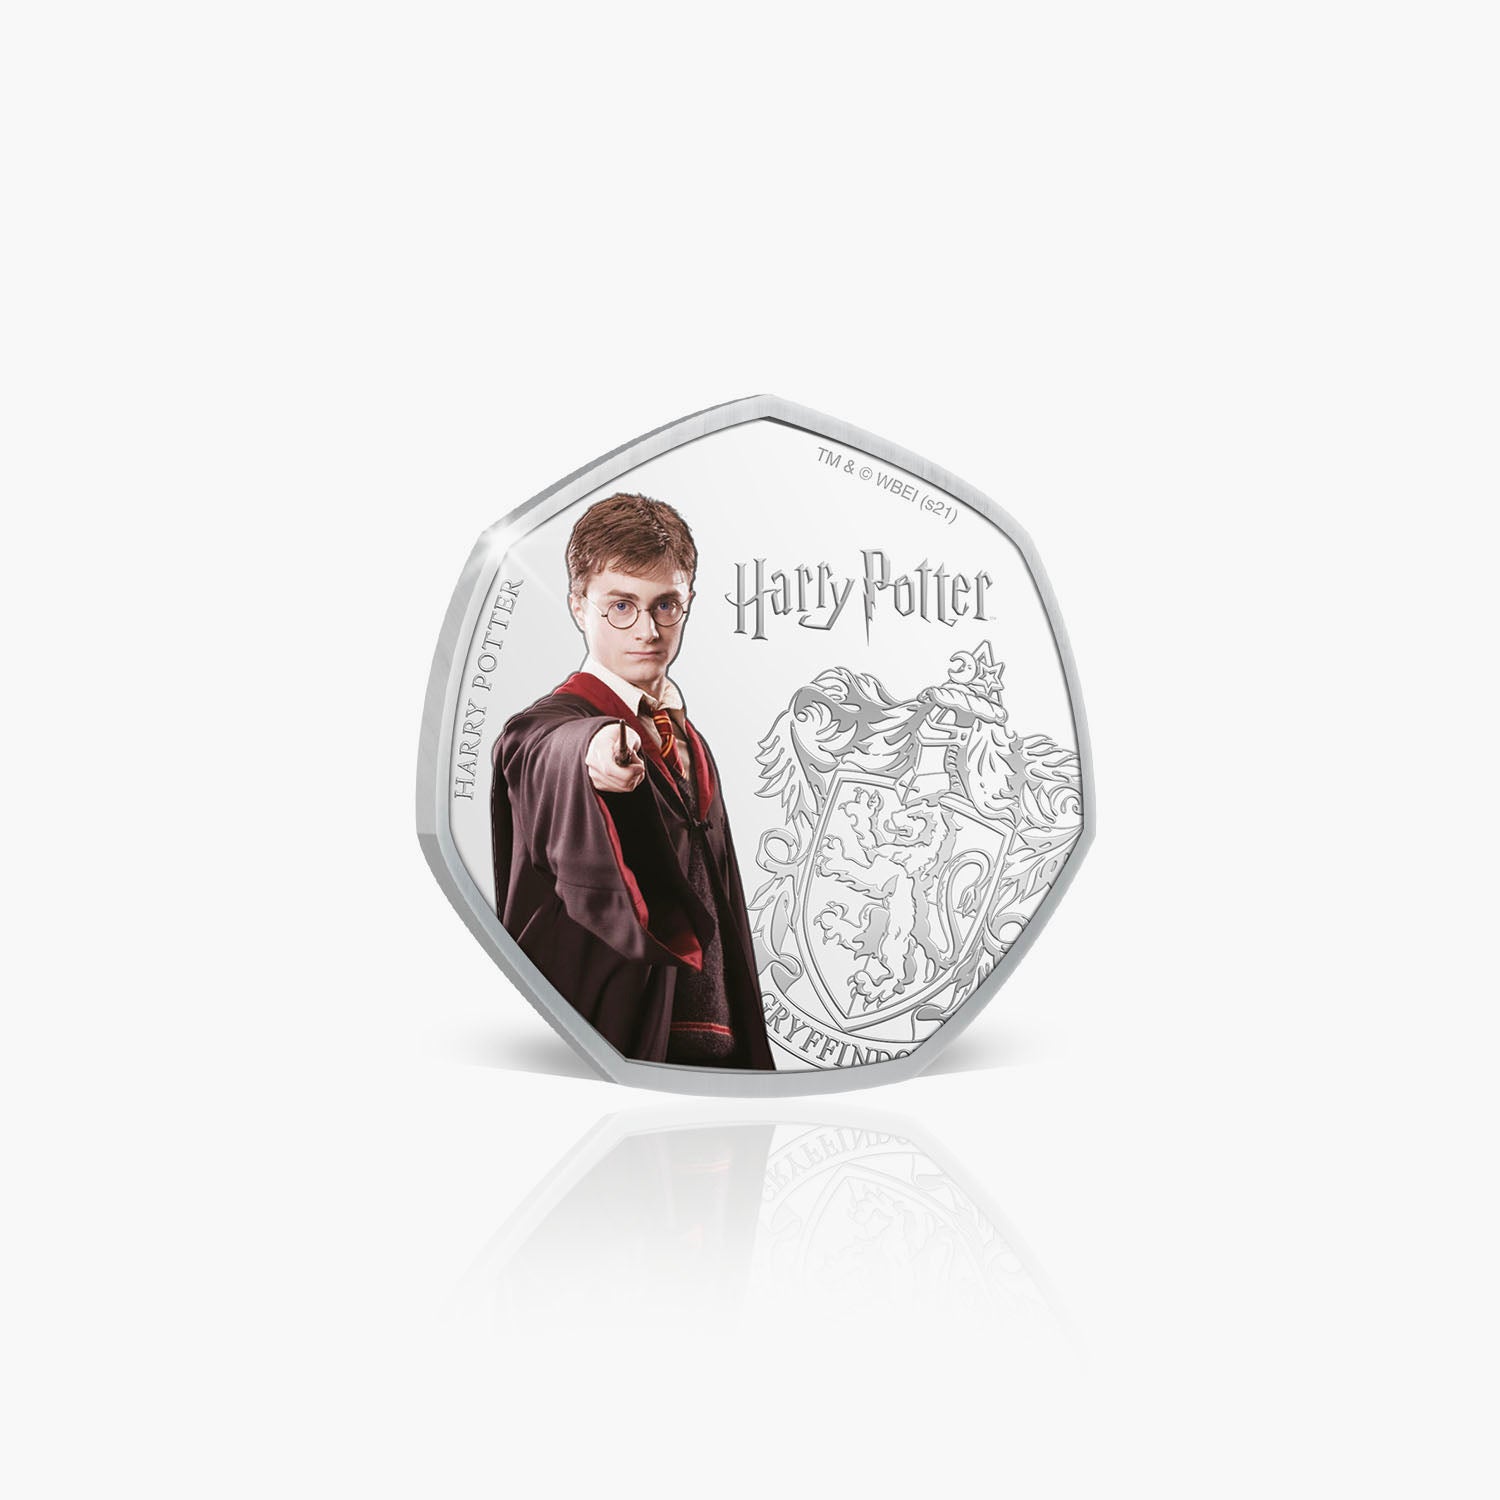 Harry Potter Silver Plated Coin with Colour